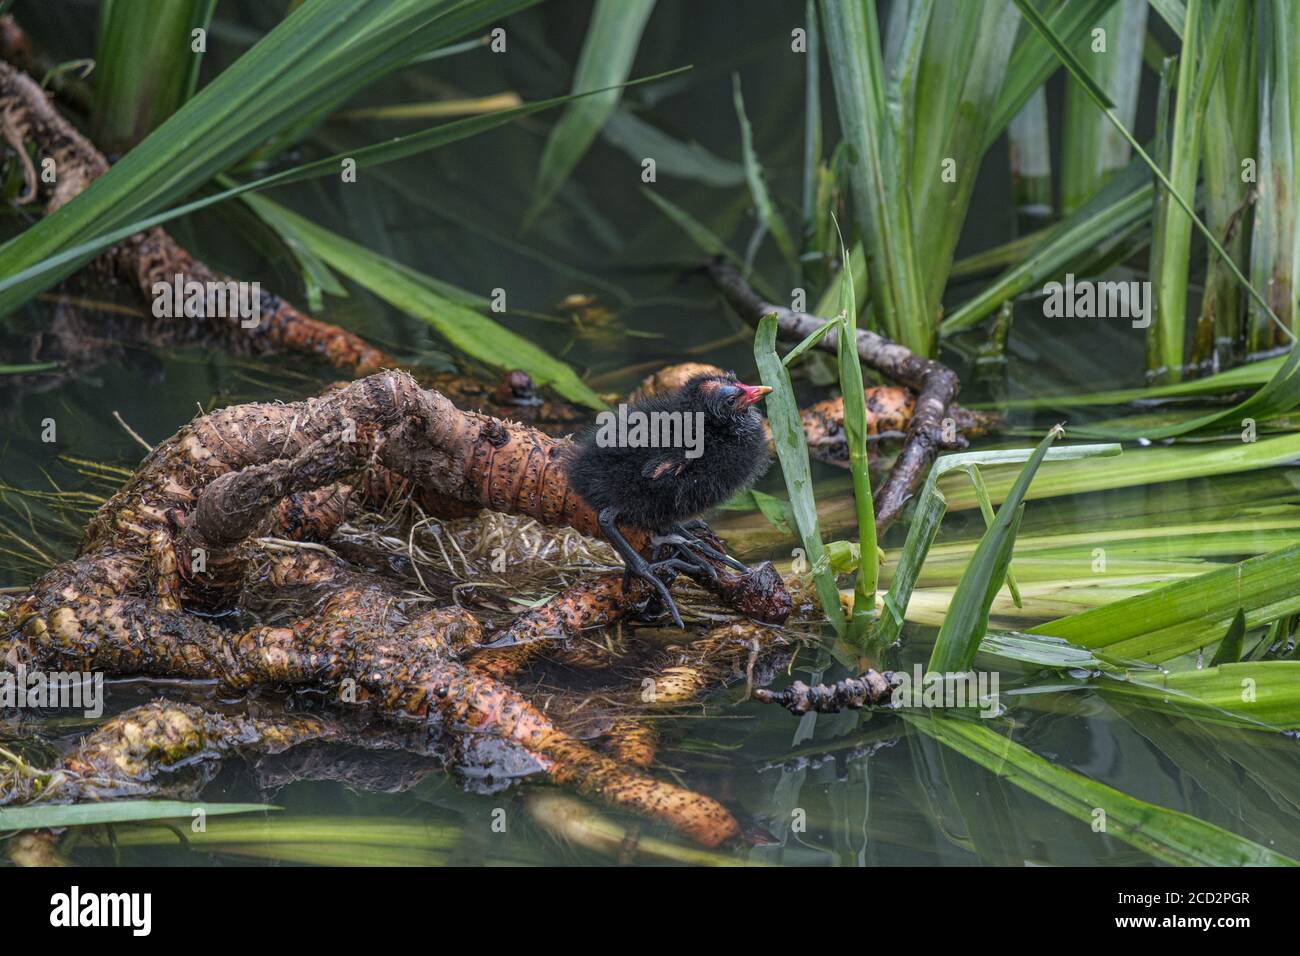 A moorhen chick standing on roots in shallow water, amongst the reeds. Photo taken at Pinner Memorial Park, Pinner, West London. Stock Photo